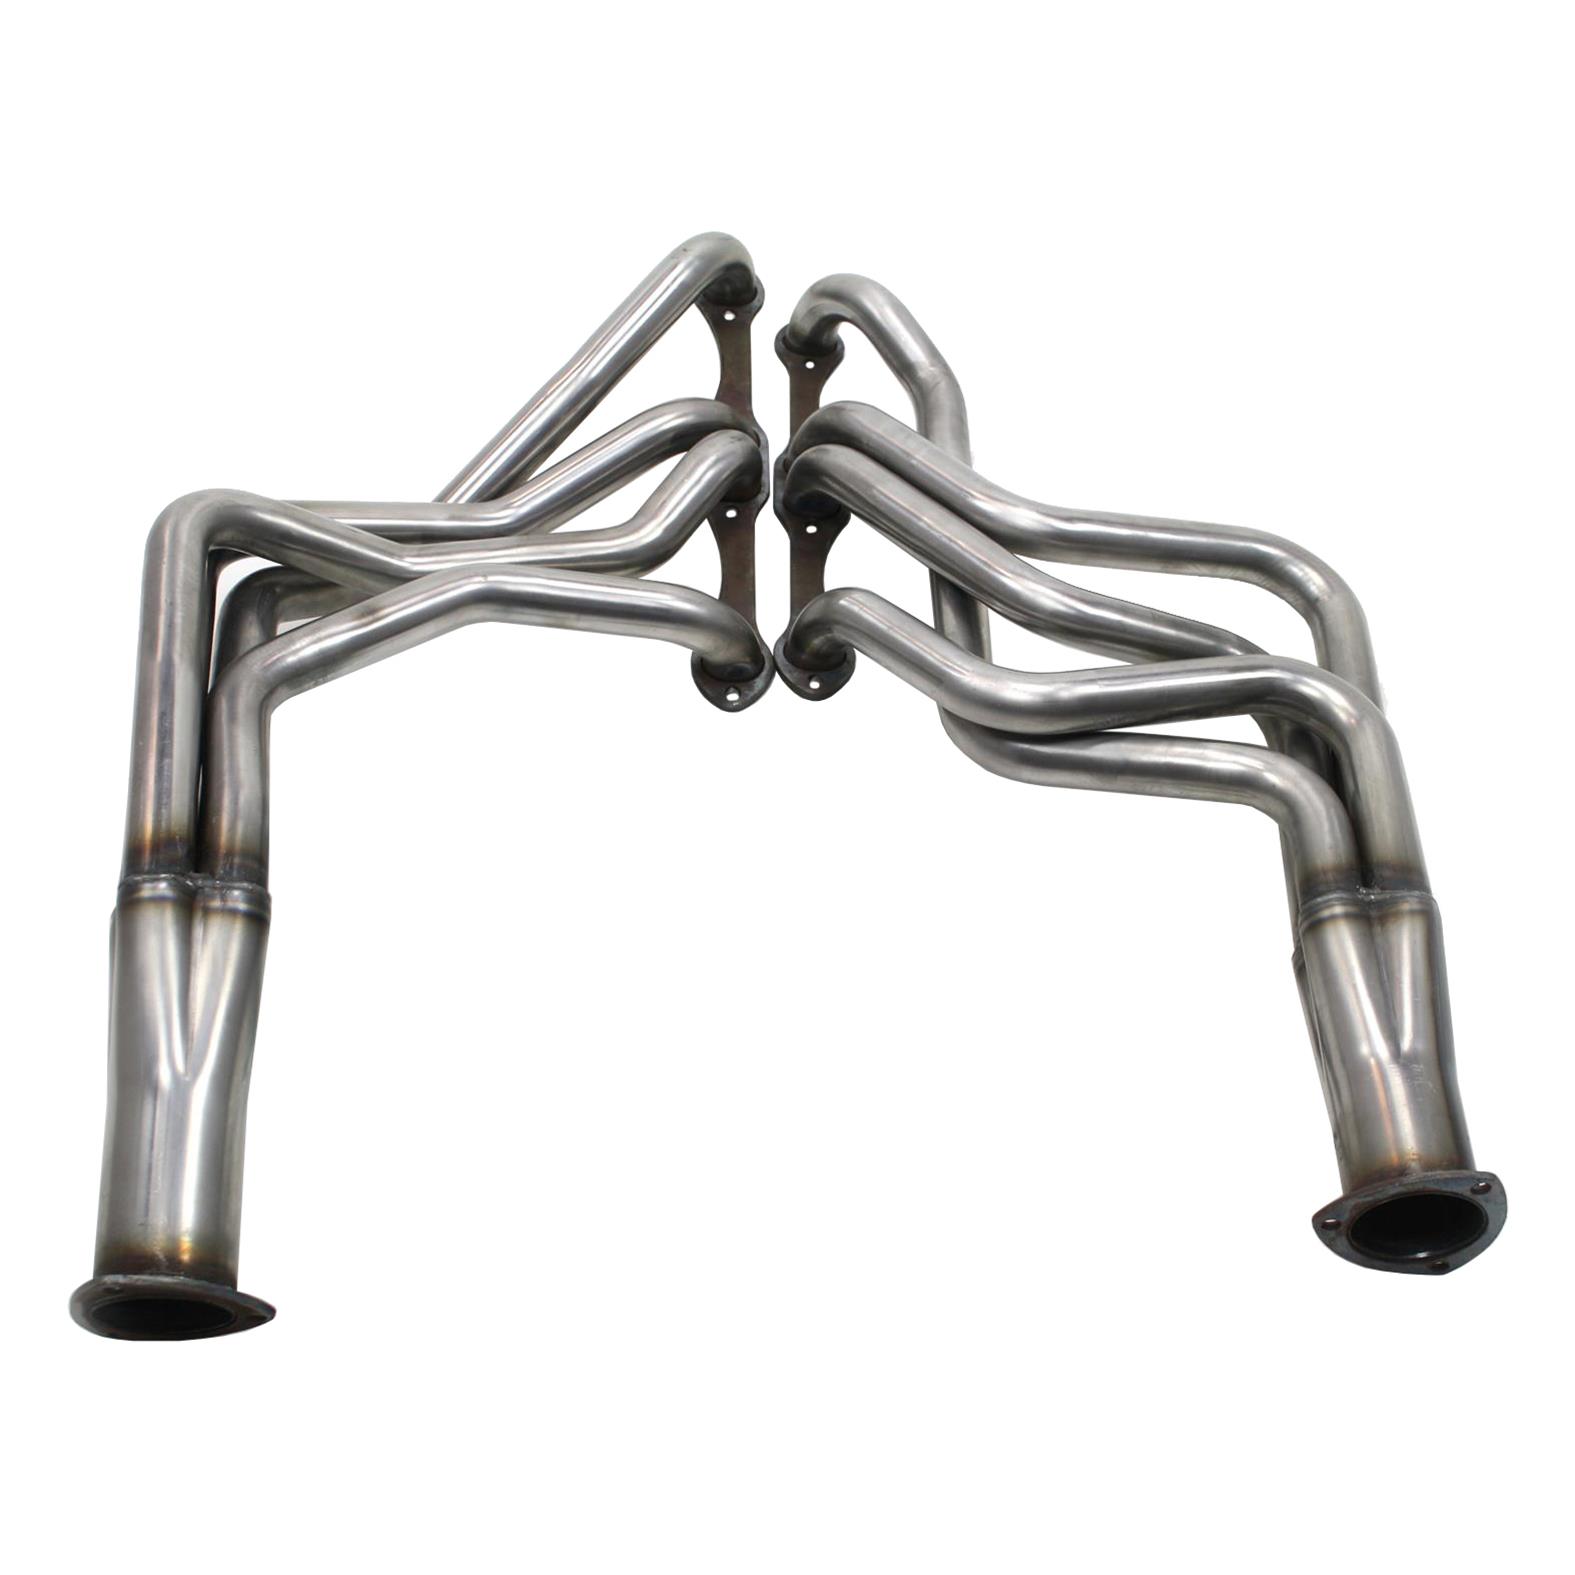 Patriot Exhaust H8047 1 5/8” Exhaust Header for Small Block Chevrolet 67-71 Raw 